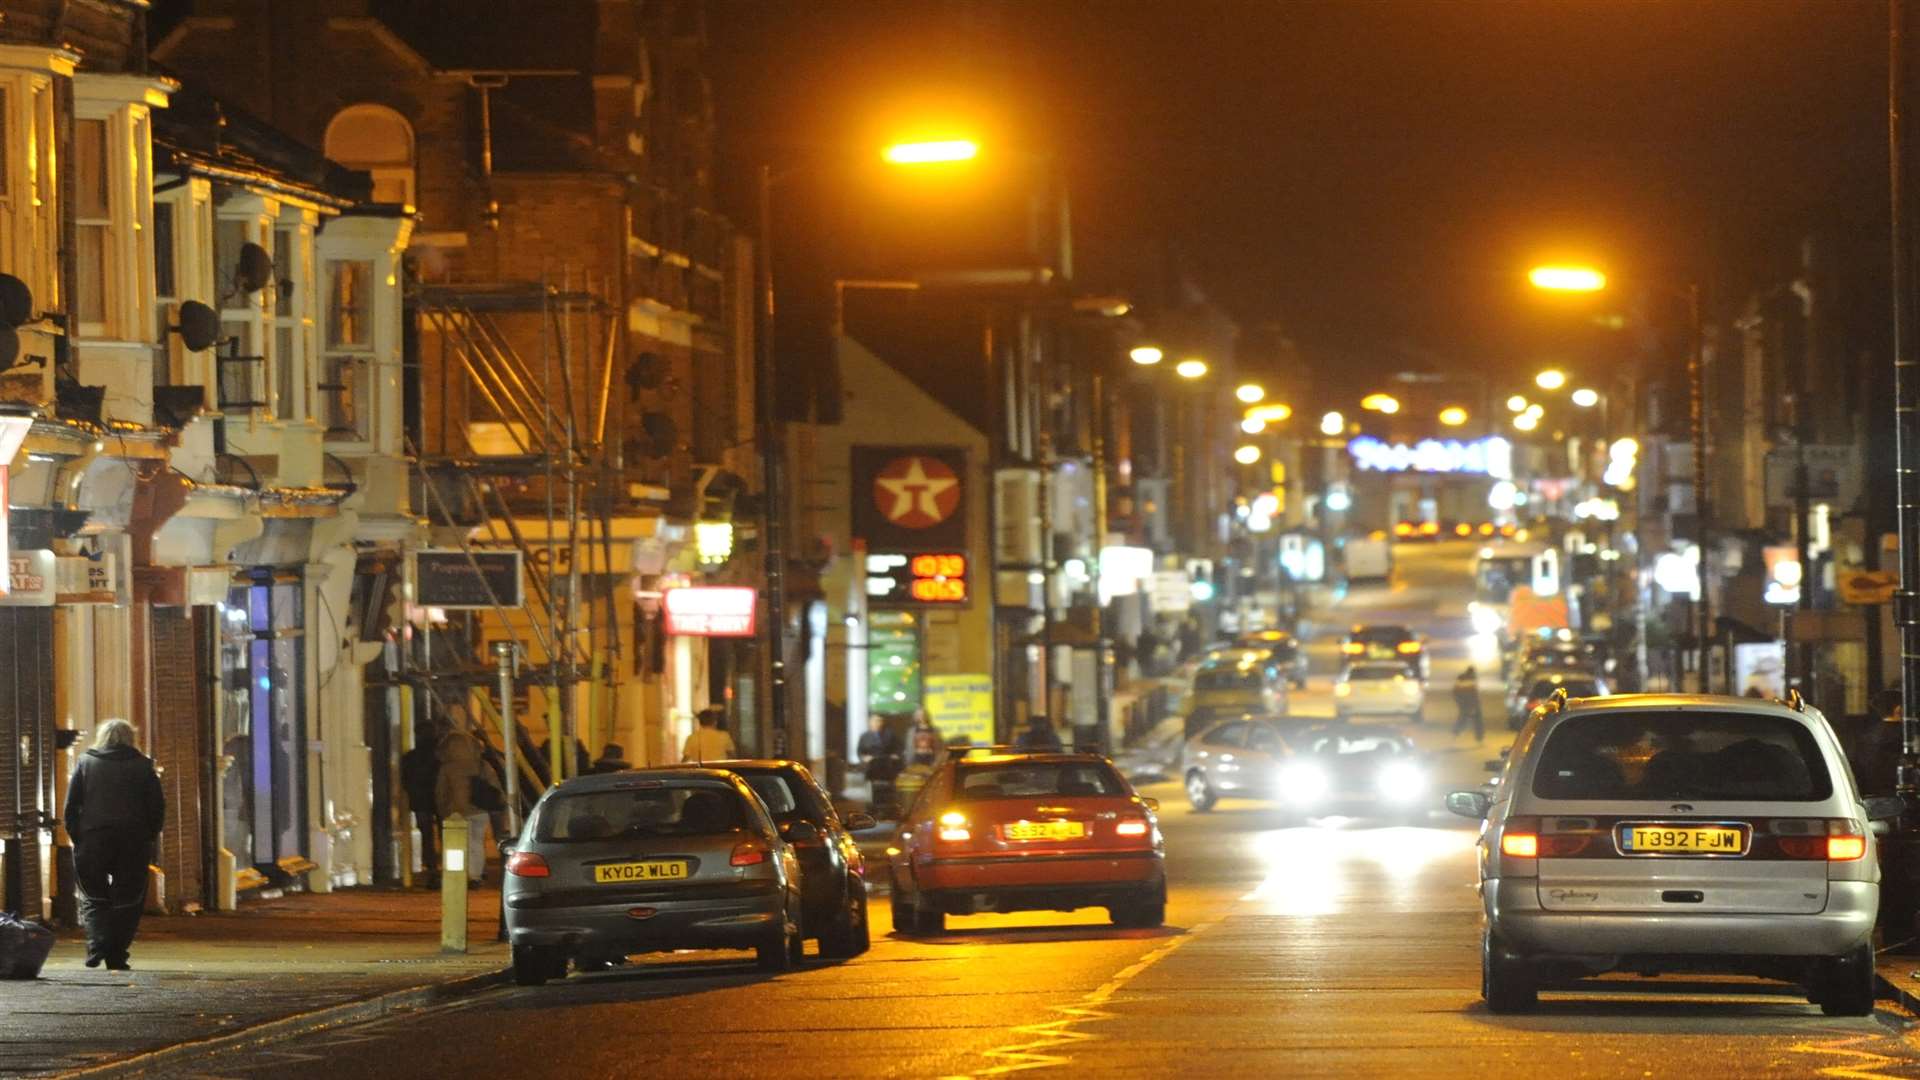 Council bosses launched a crackdown on illegally parked cars in Herne Bay High Street